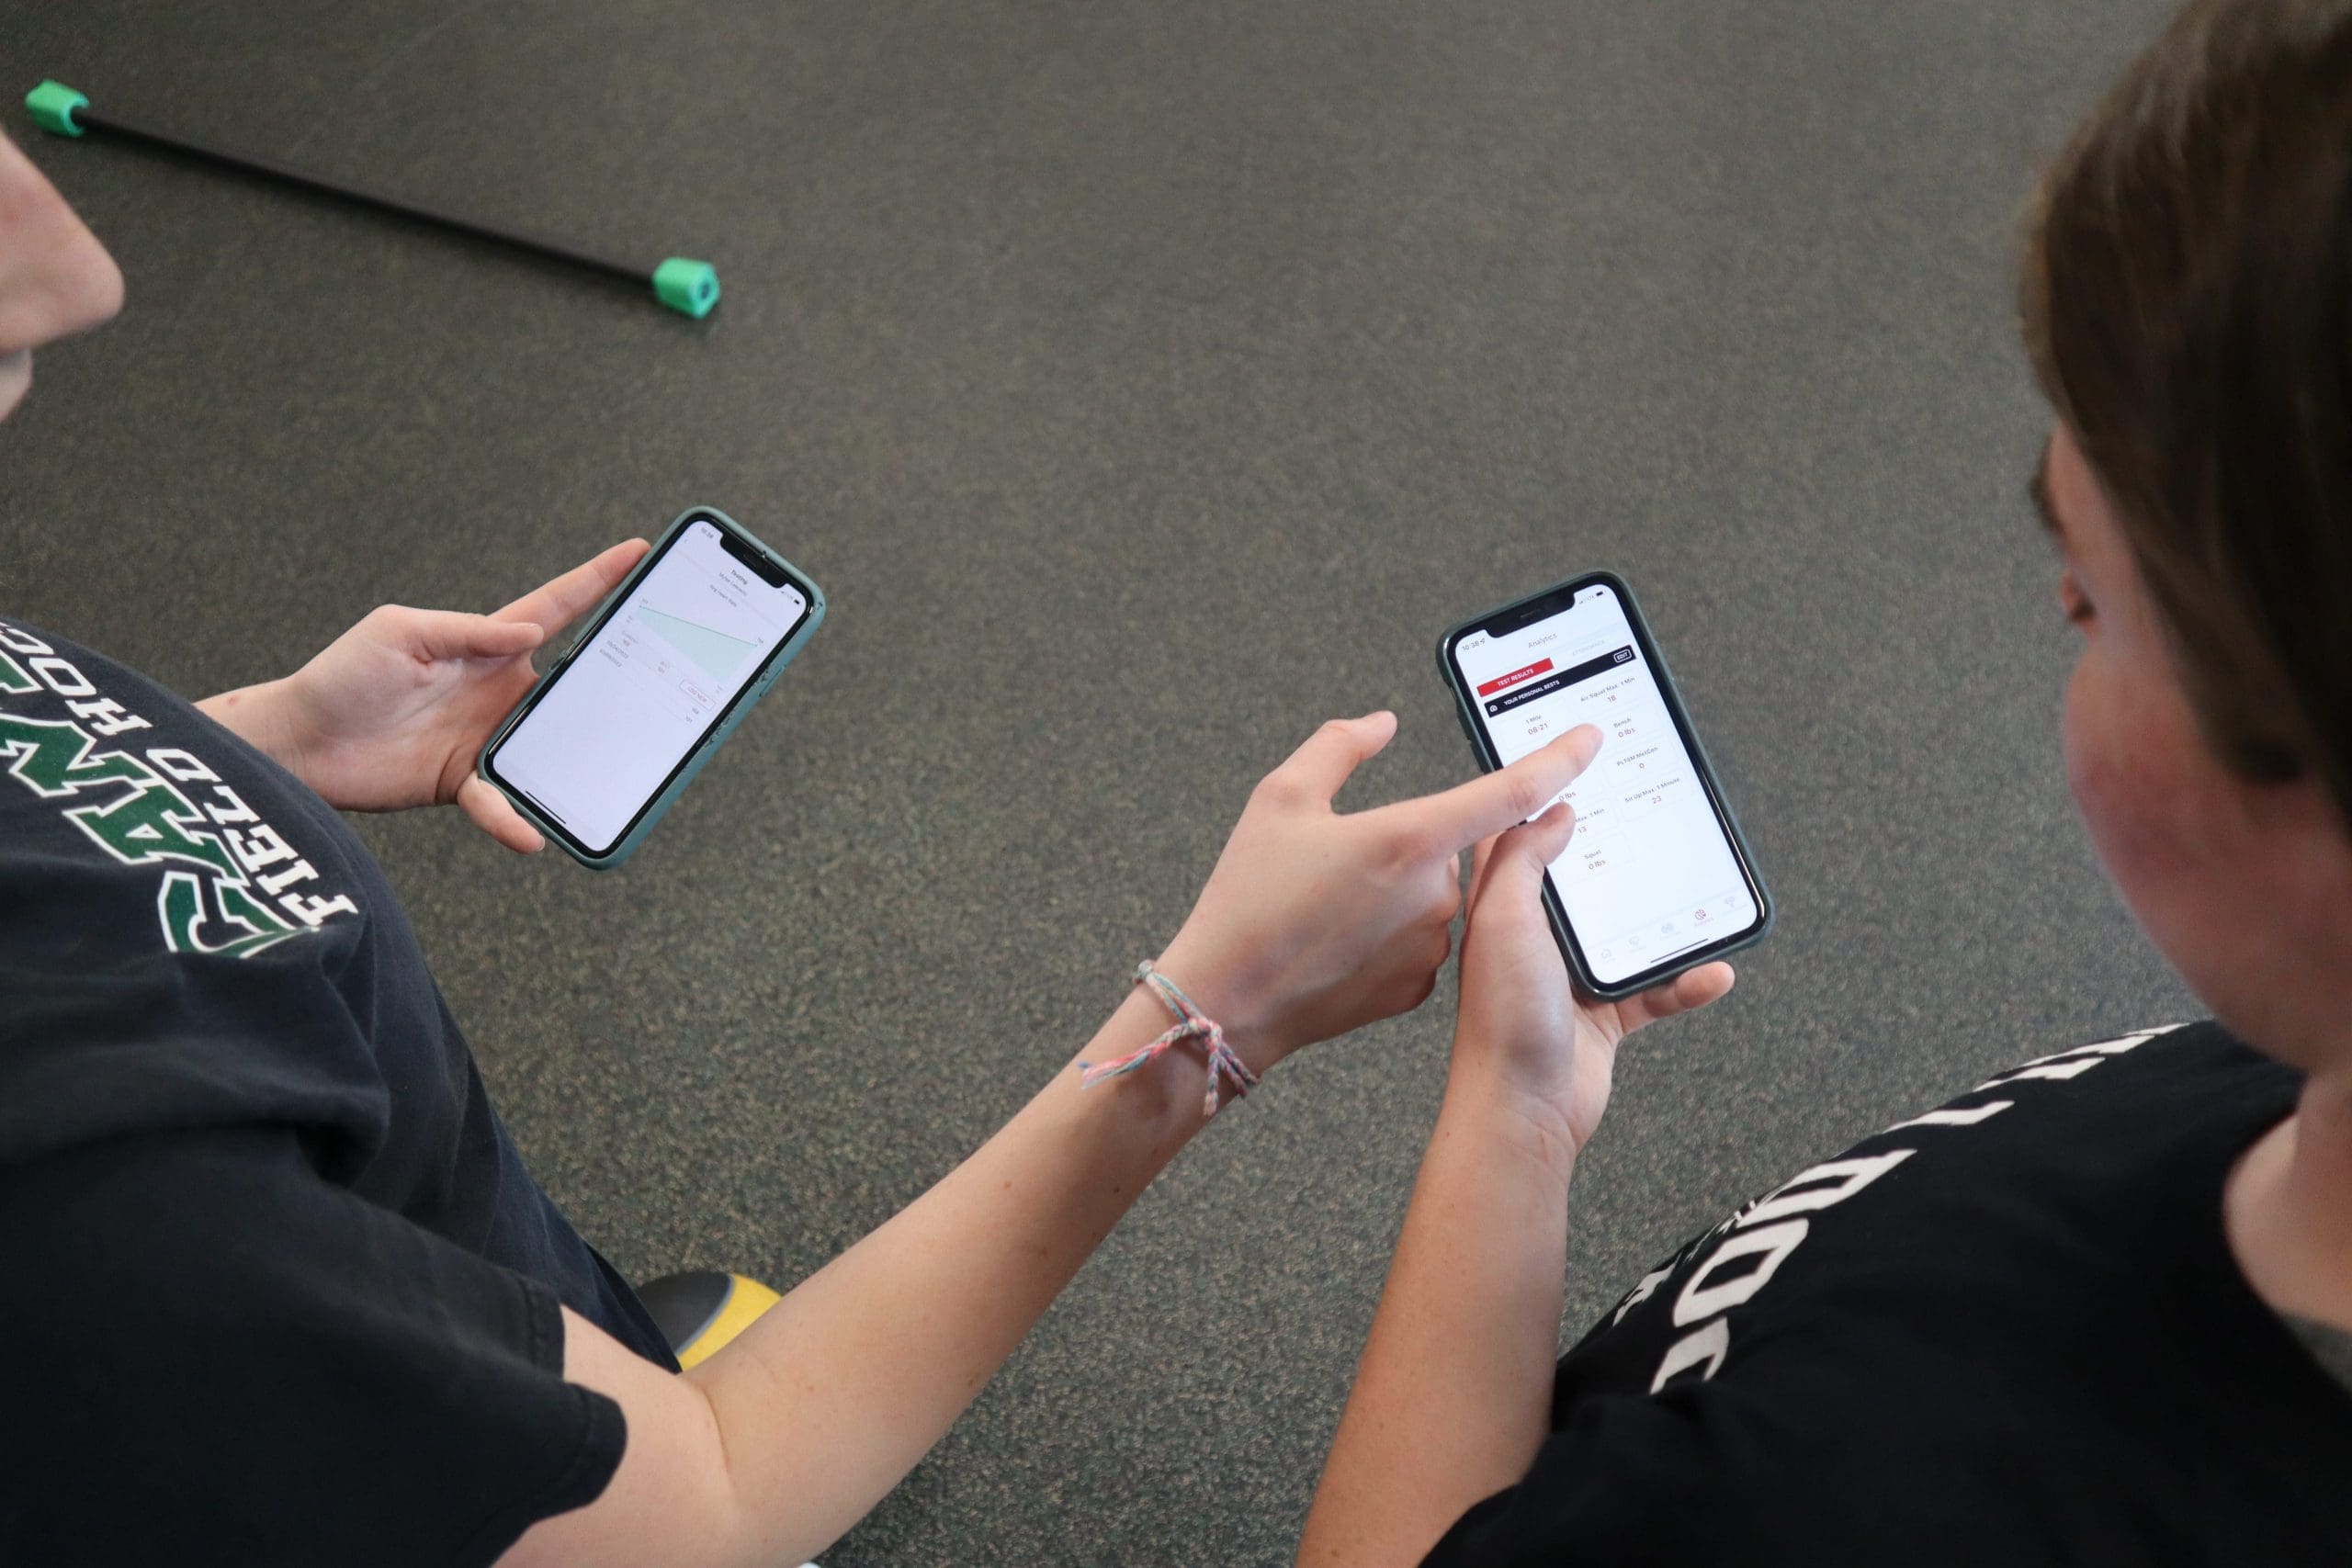 Students use the PLT4M app during a physical education class.